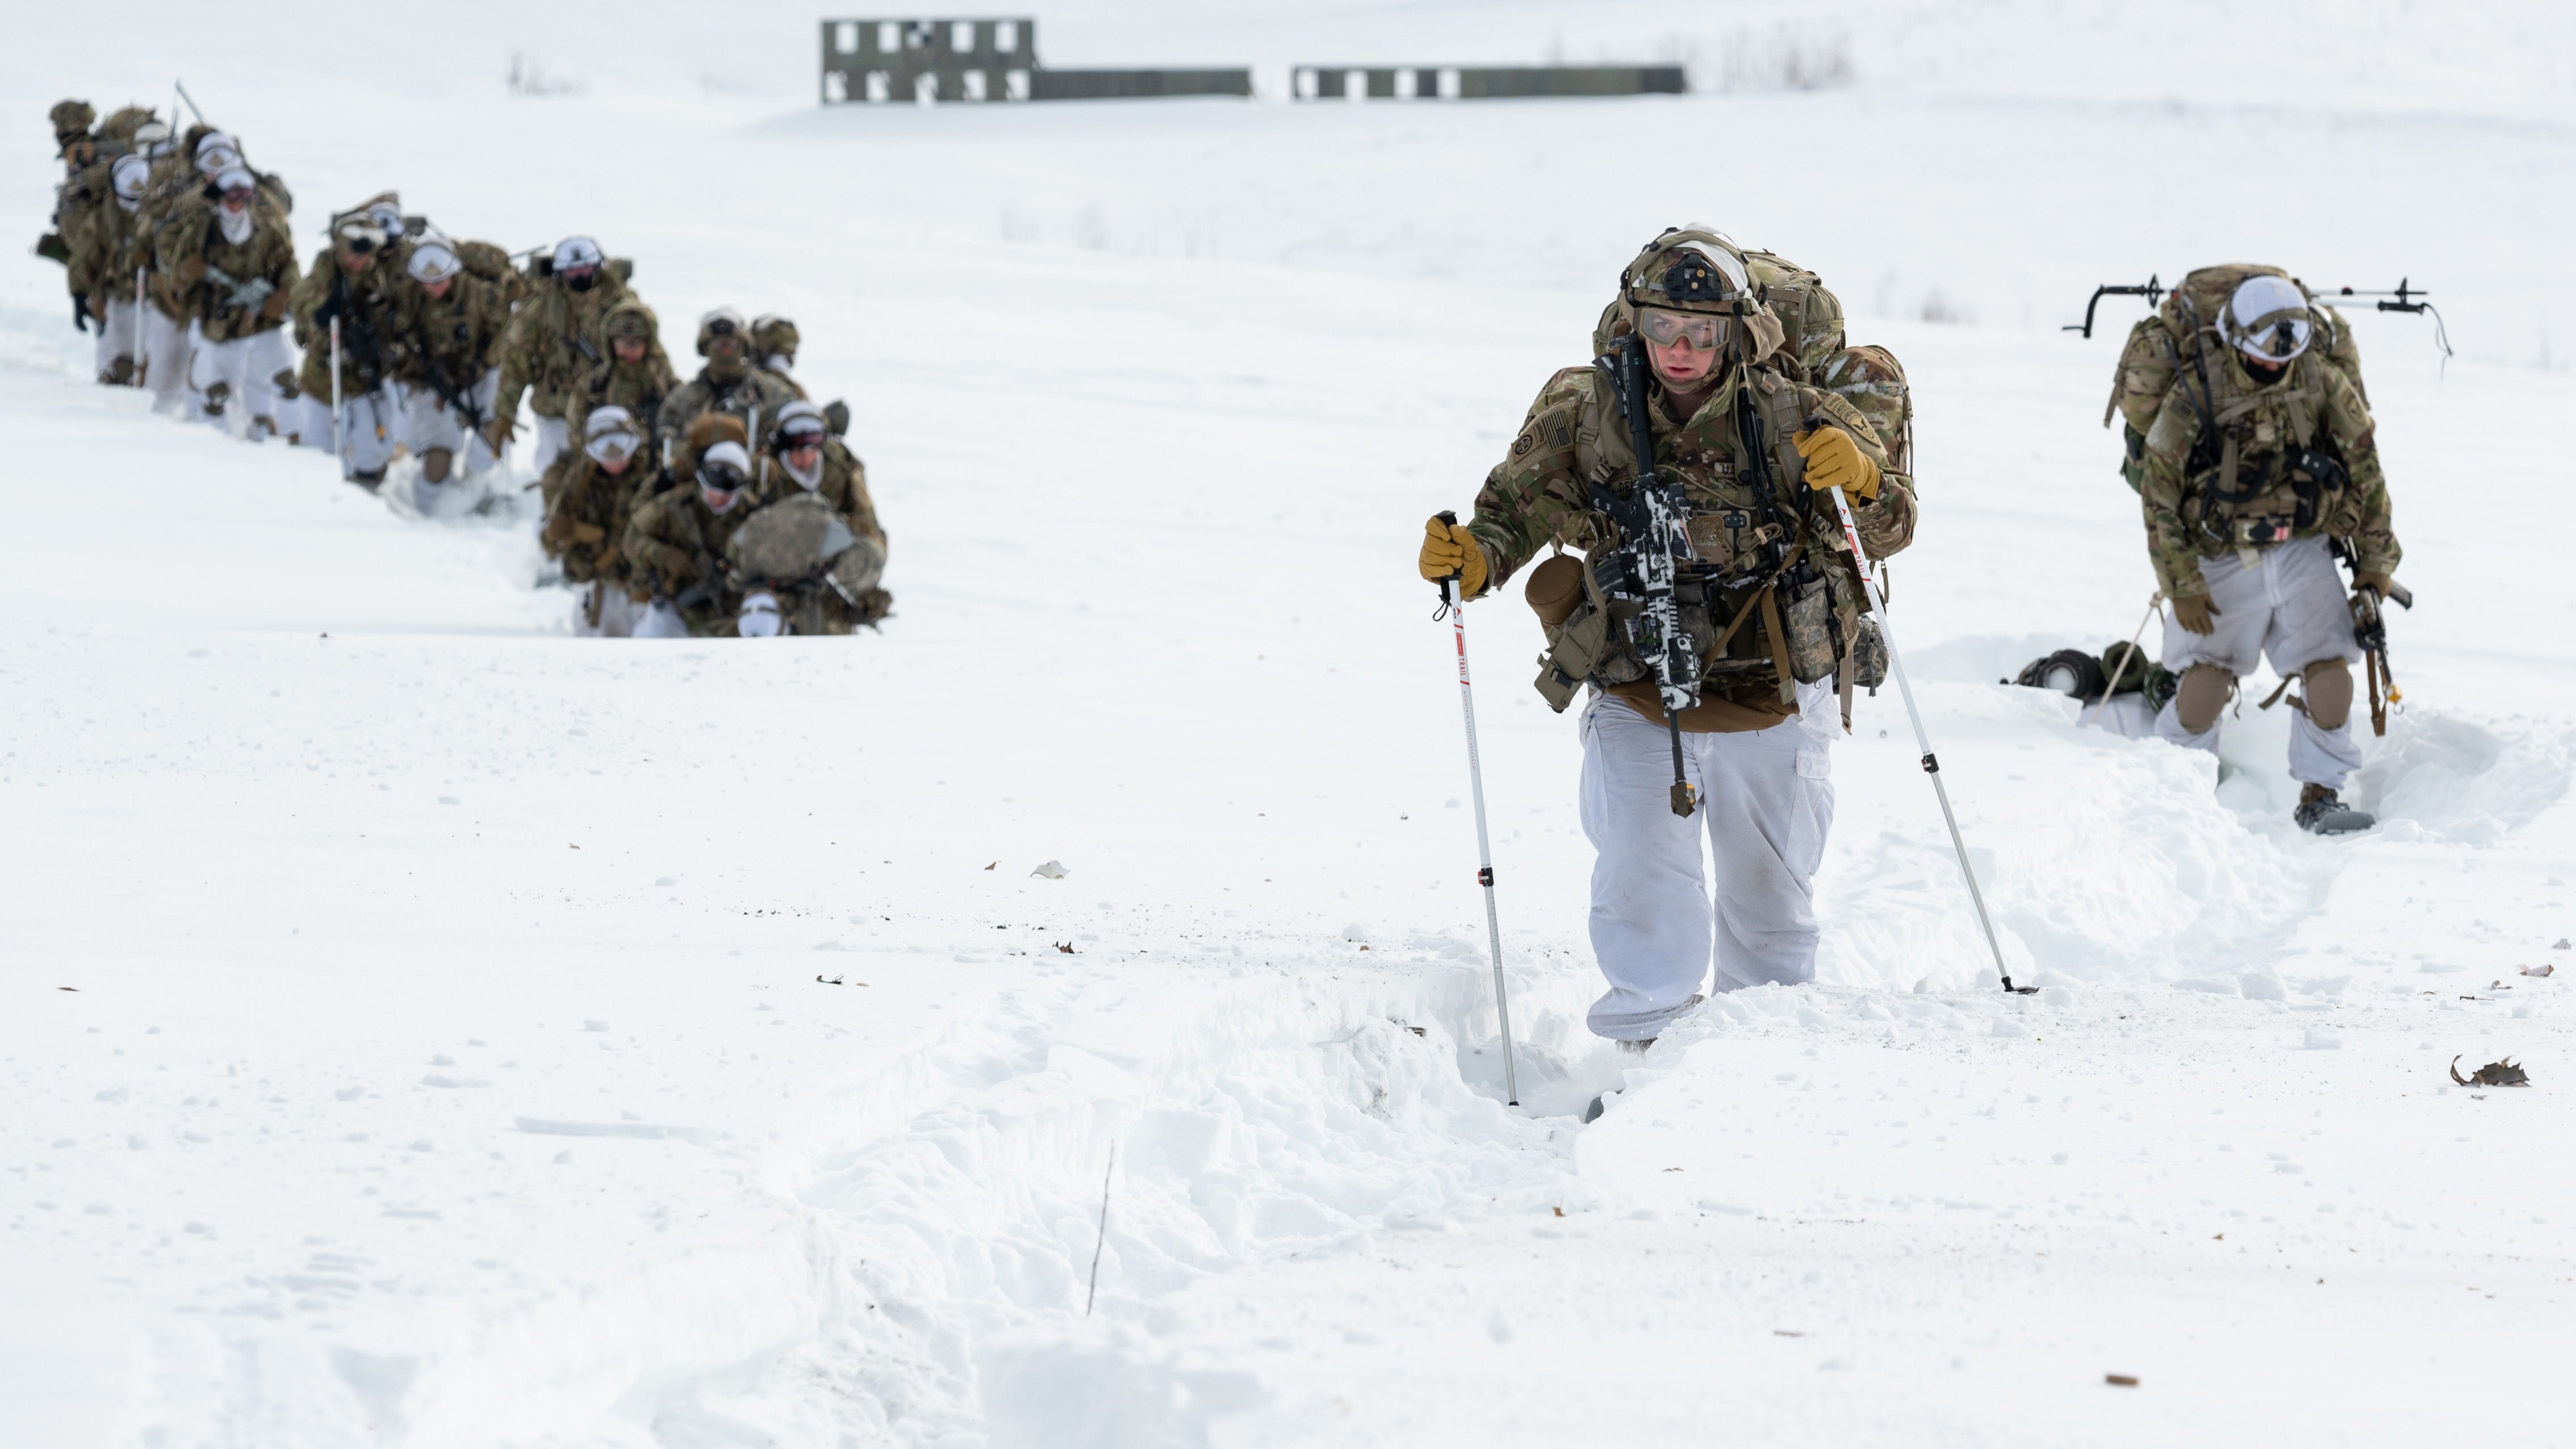 Soldiers on skis